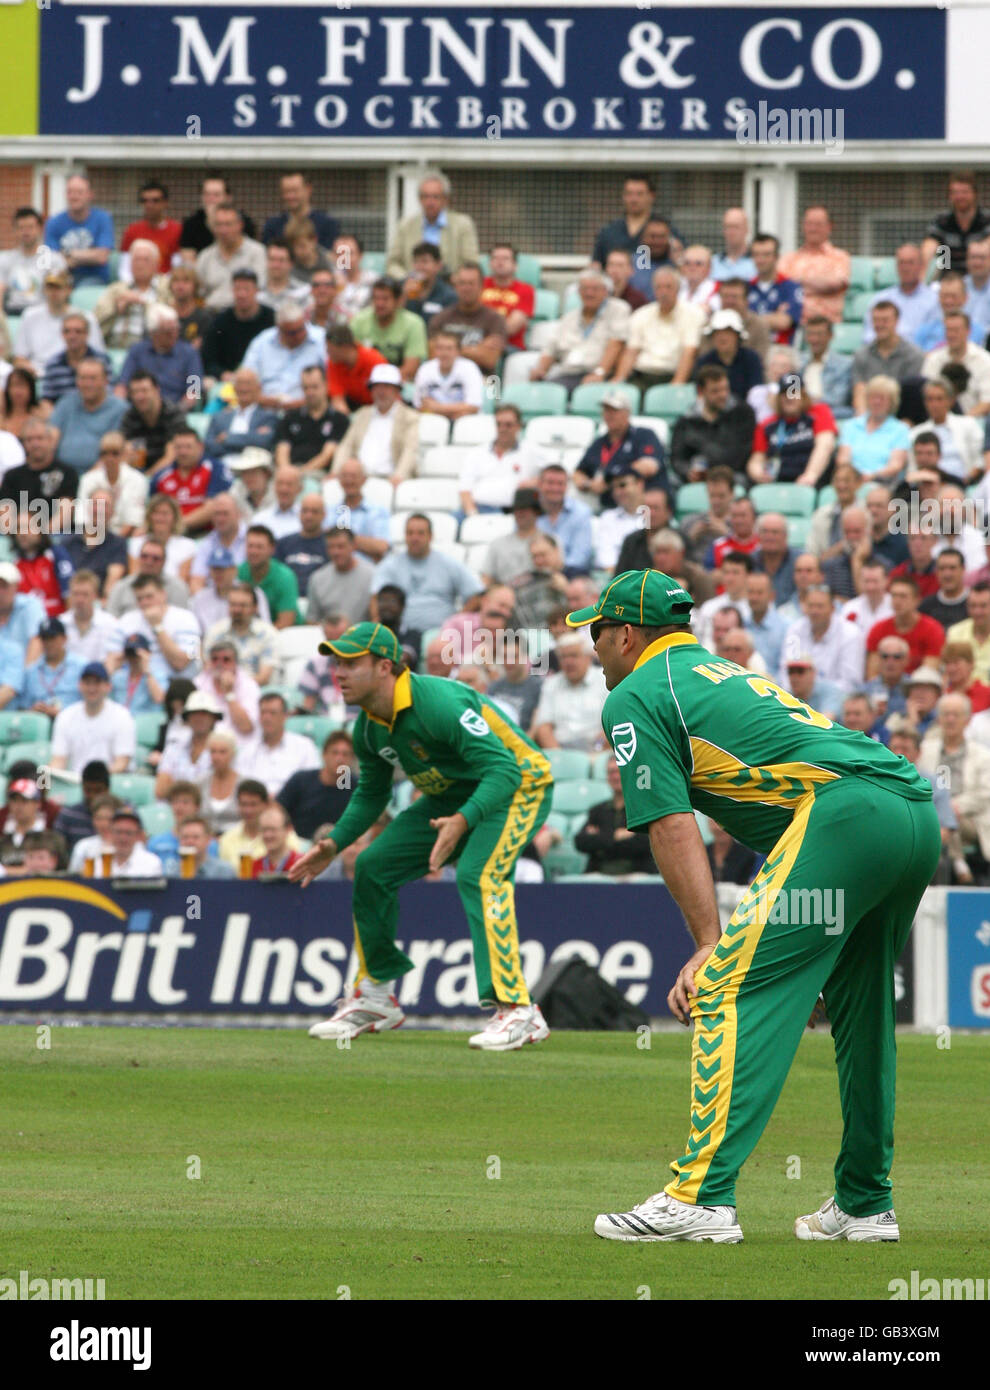 Cricket - Natwest Series - Third One Day International - England v South Africa - Brit oval. South Africa's Jacques Kallis (r) and AB de Villiers await a delivery in the slip cordon Stock Photo